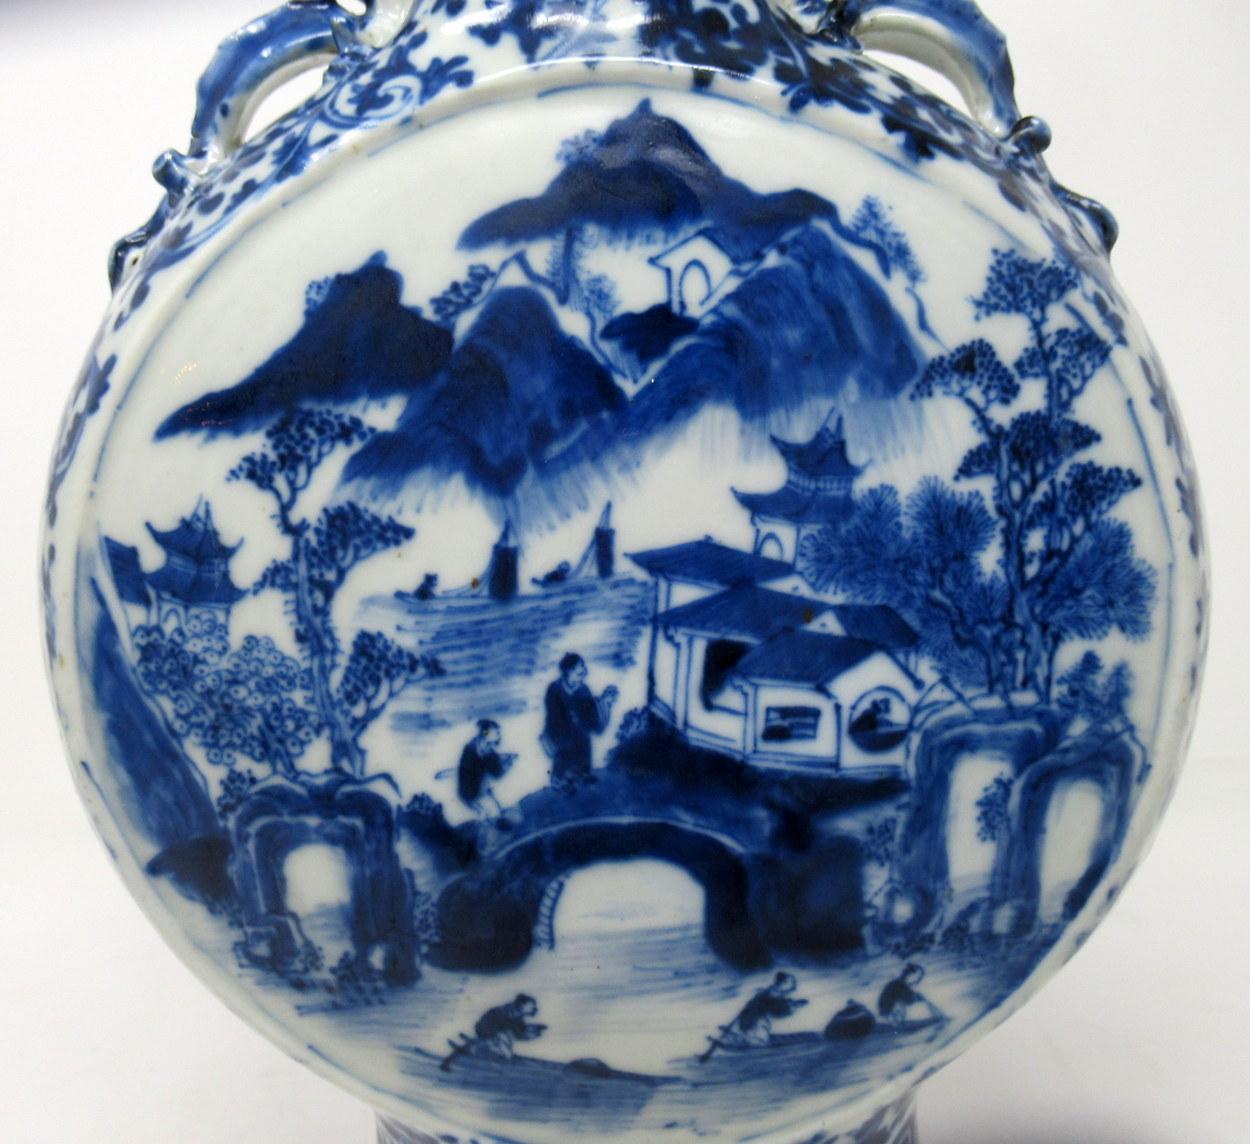 Ceramic Antique Chinese Export Porcelain Hand Painted Blue White Moon Flask 19th Century